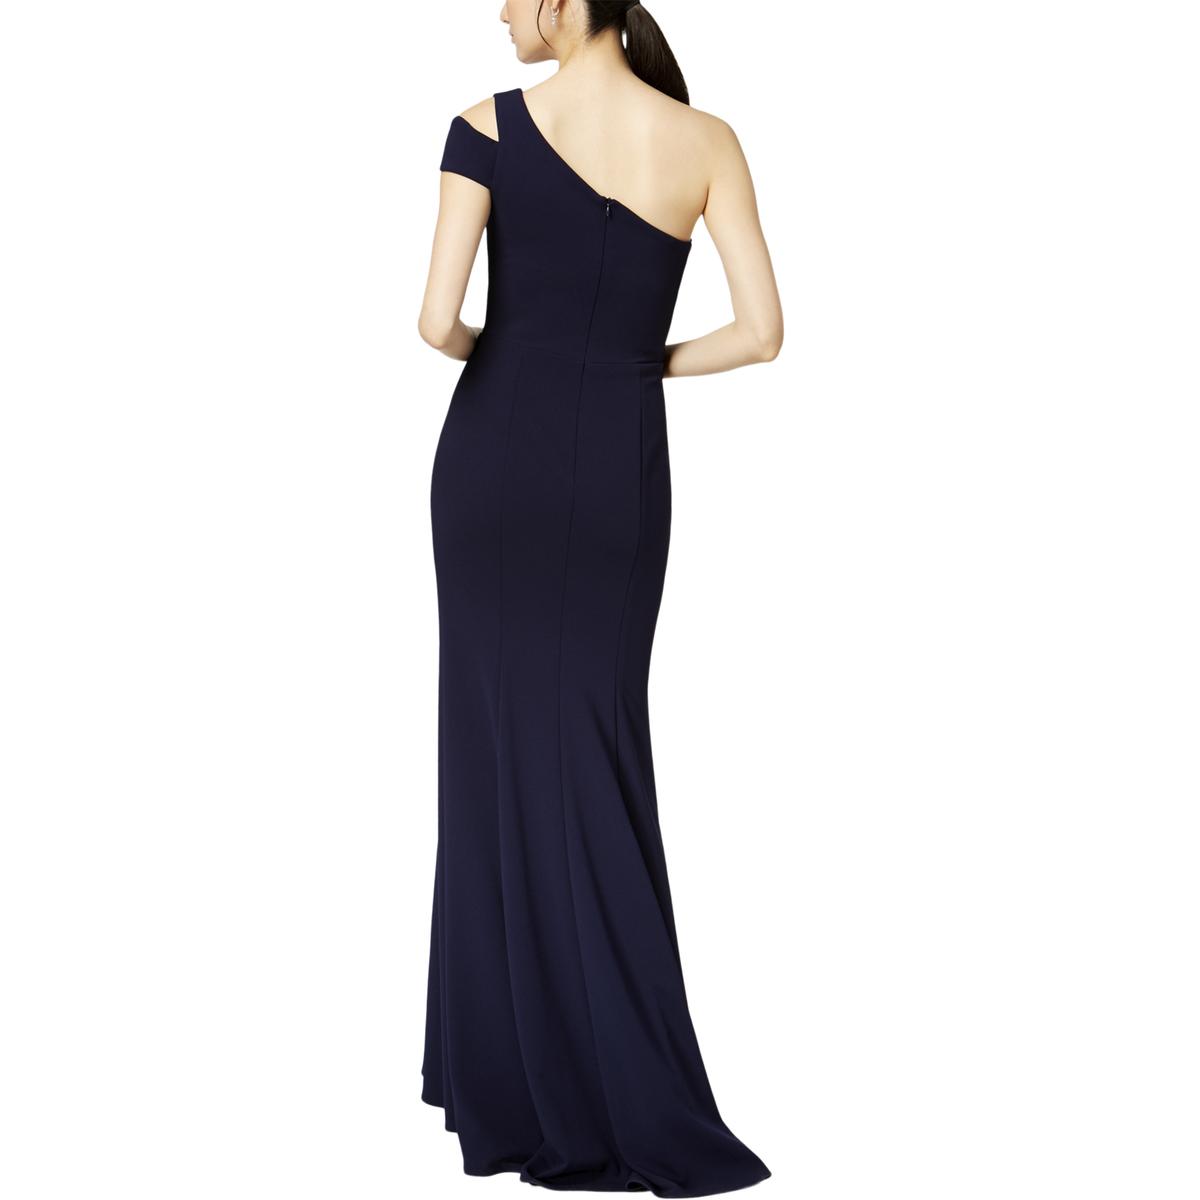 Betsy & Adam Womens Navy One Shoulder Formal Dress Gown Petites 8P BHFO ...